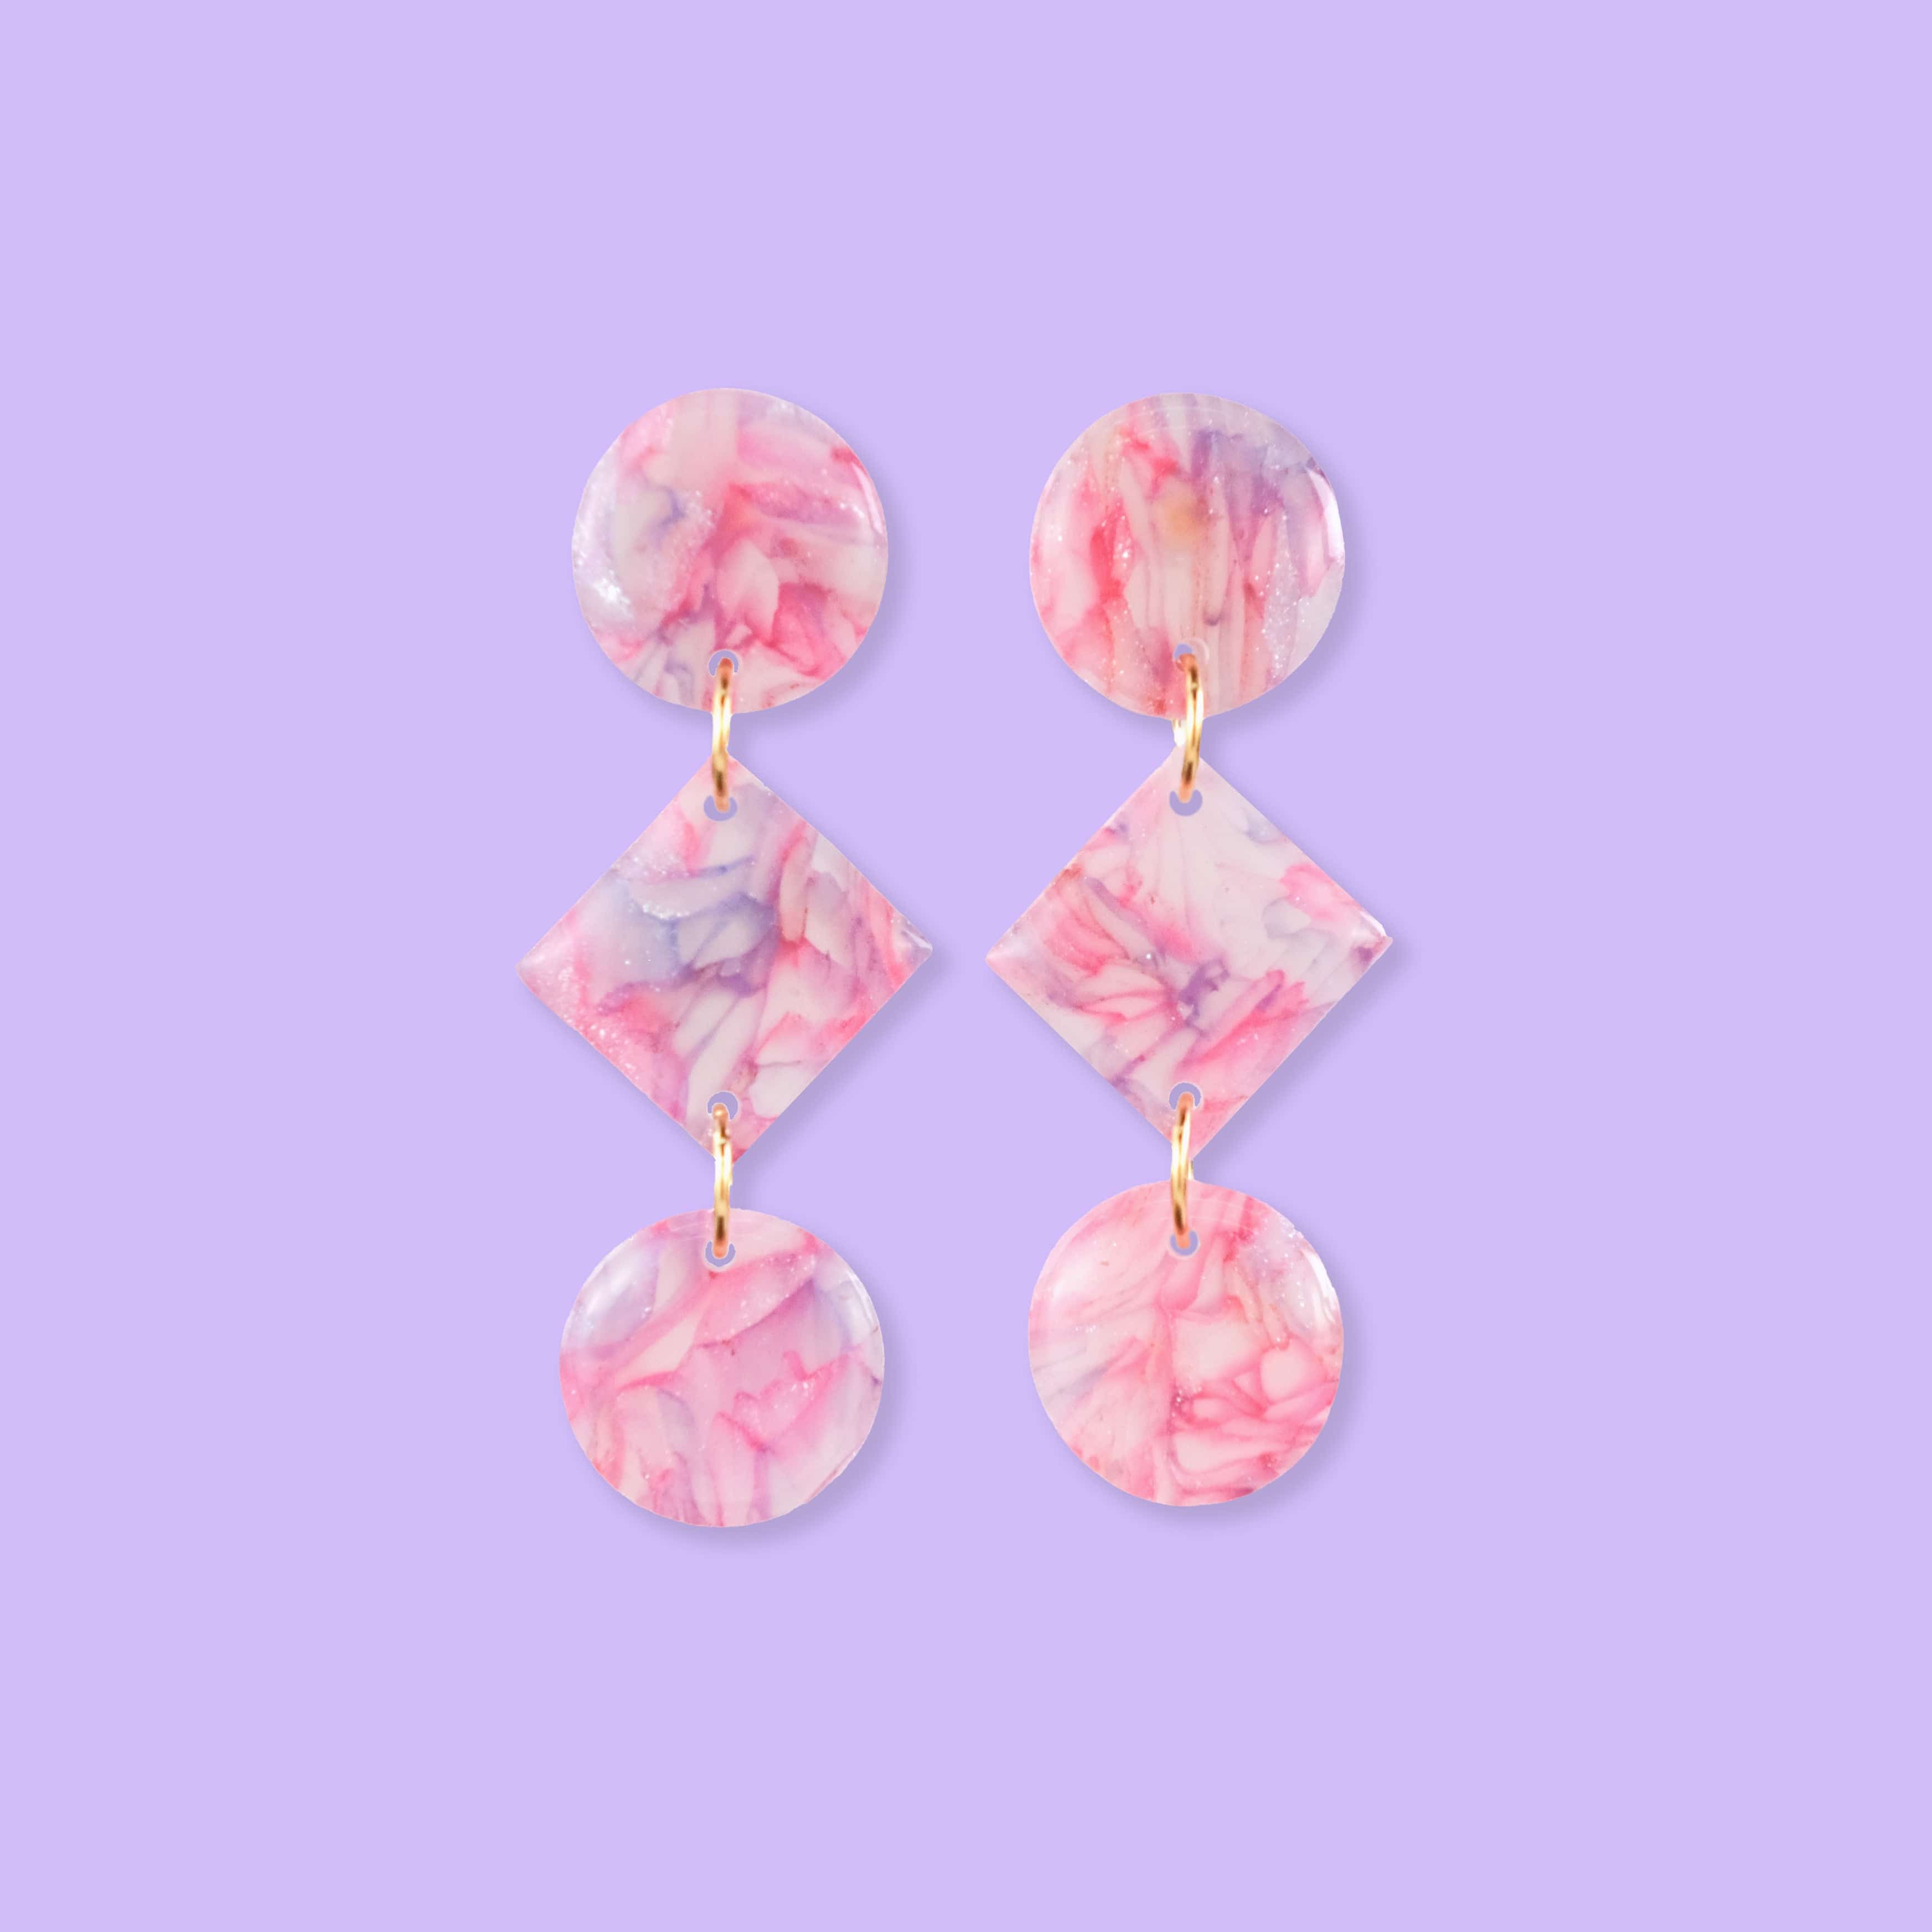 Marbled geometric dangly earrings lightweight pink purple and translucent